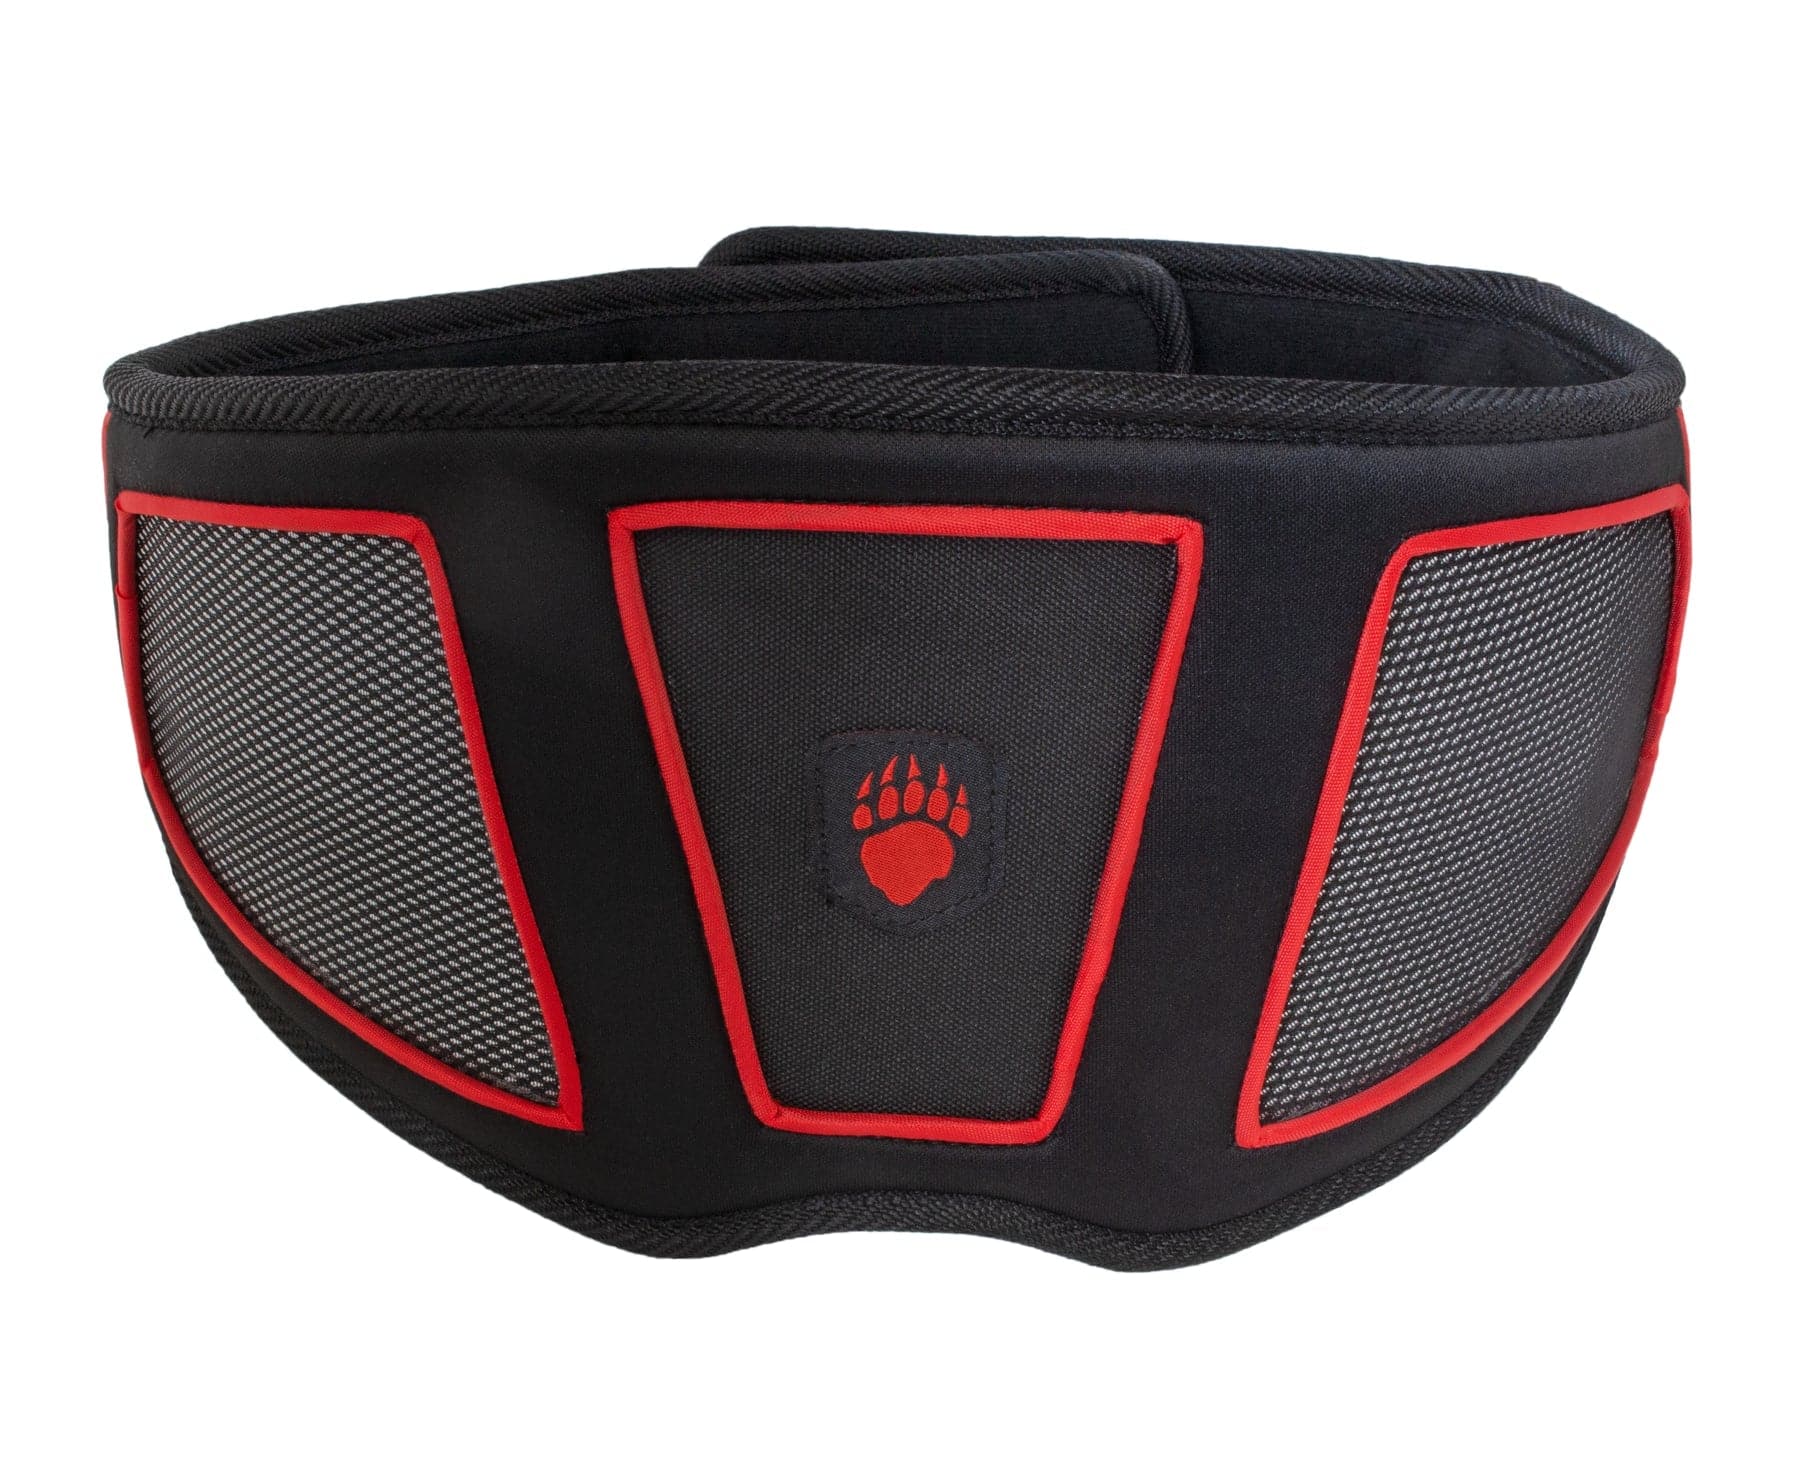 Grizzly Fitness Grizzly 7" Soflex Panel Training Belt